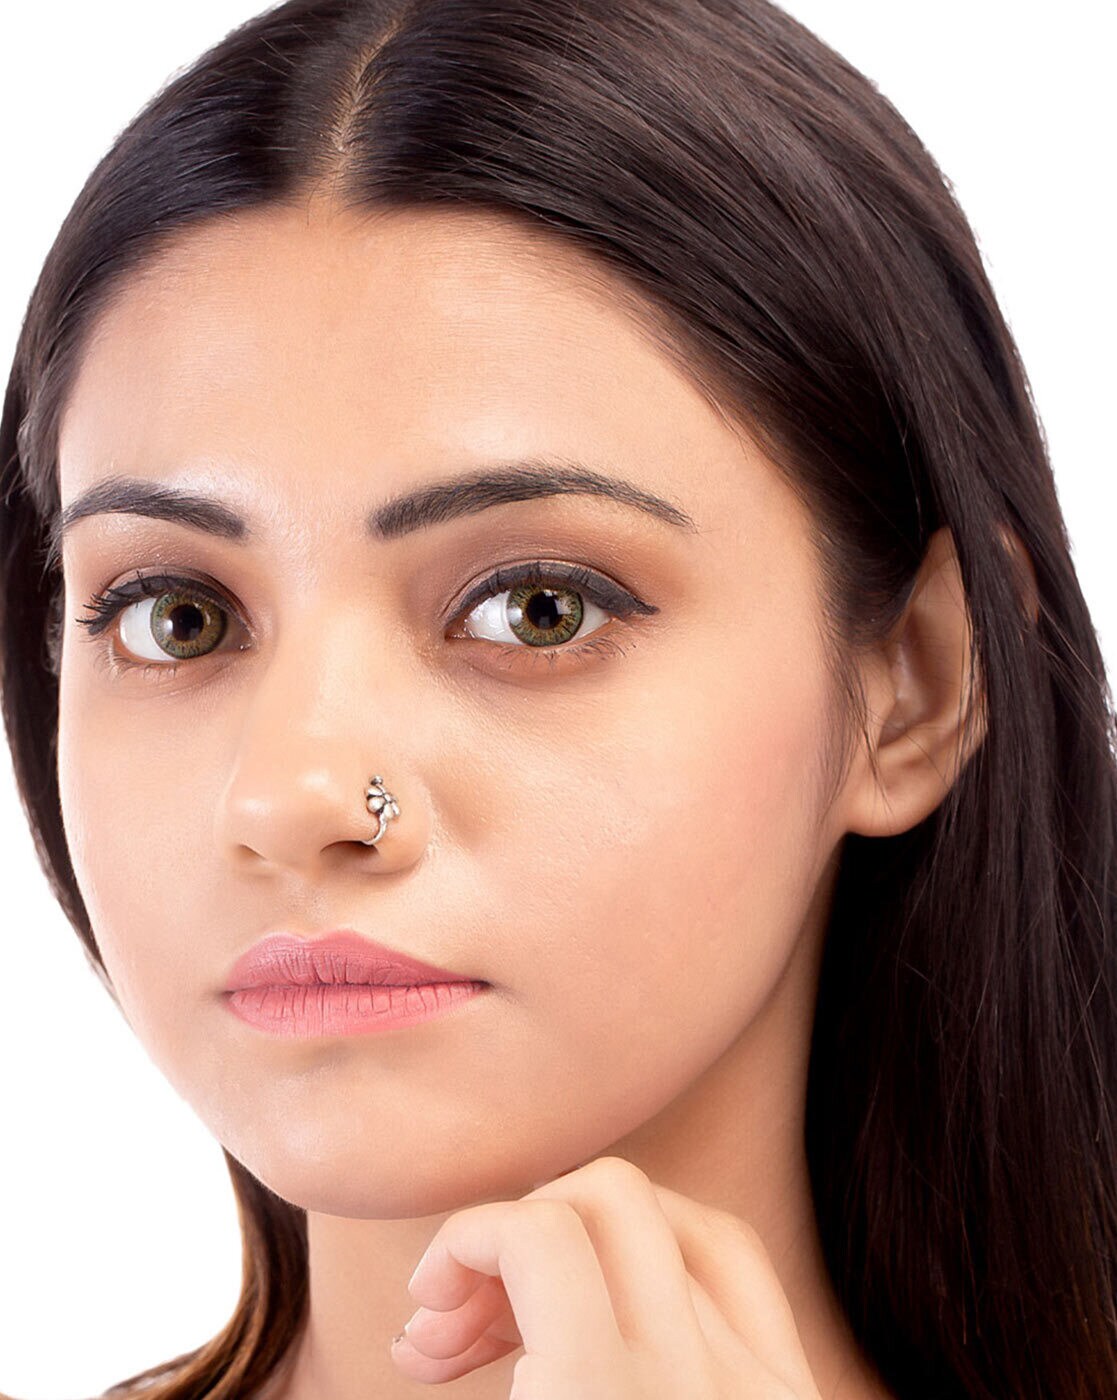 Gold Nose Ring, SOLID GOLD Nose Hoop, Moon Nose Ring, 14k Nose Ring, Snug Nose  Hoop, 14k Cartilage, Tragus, Helix, Septum Ring - Etsy